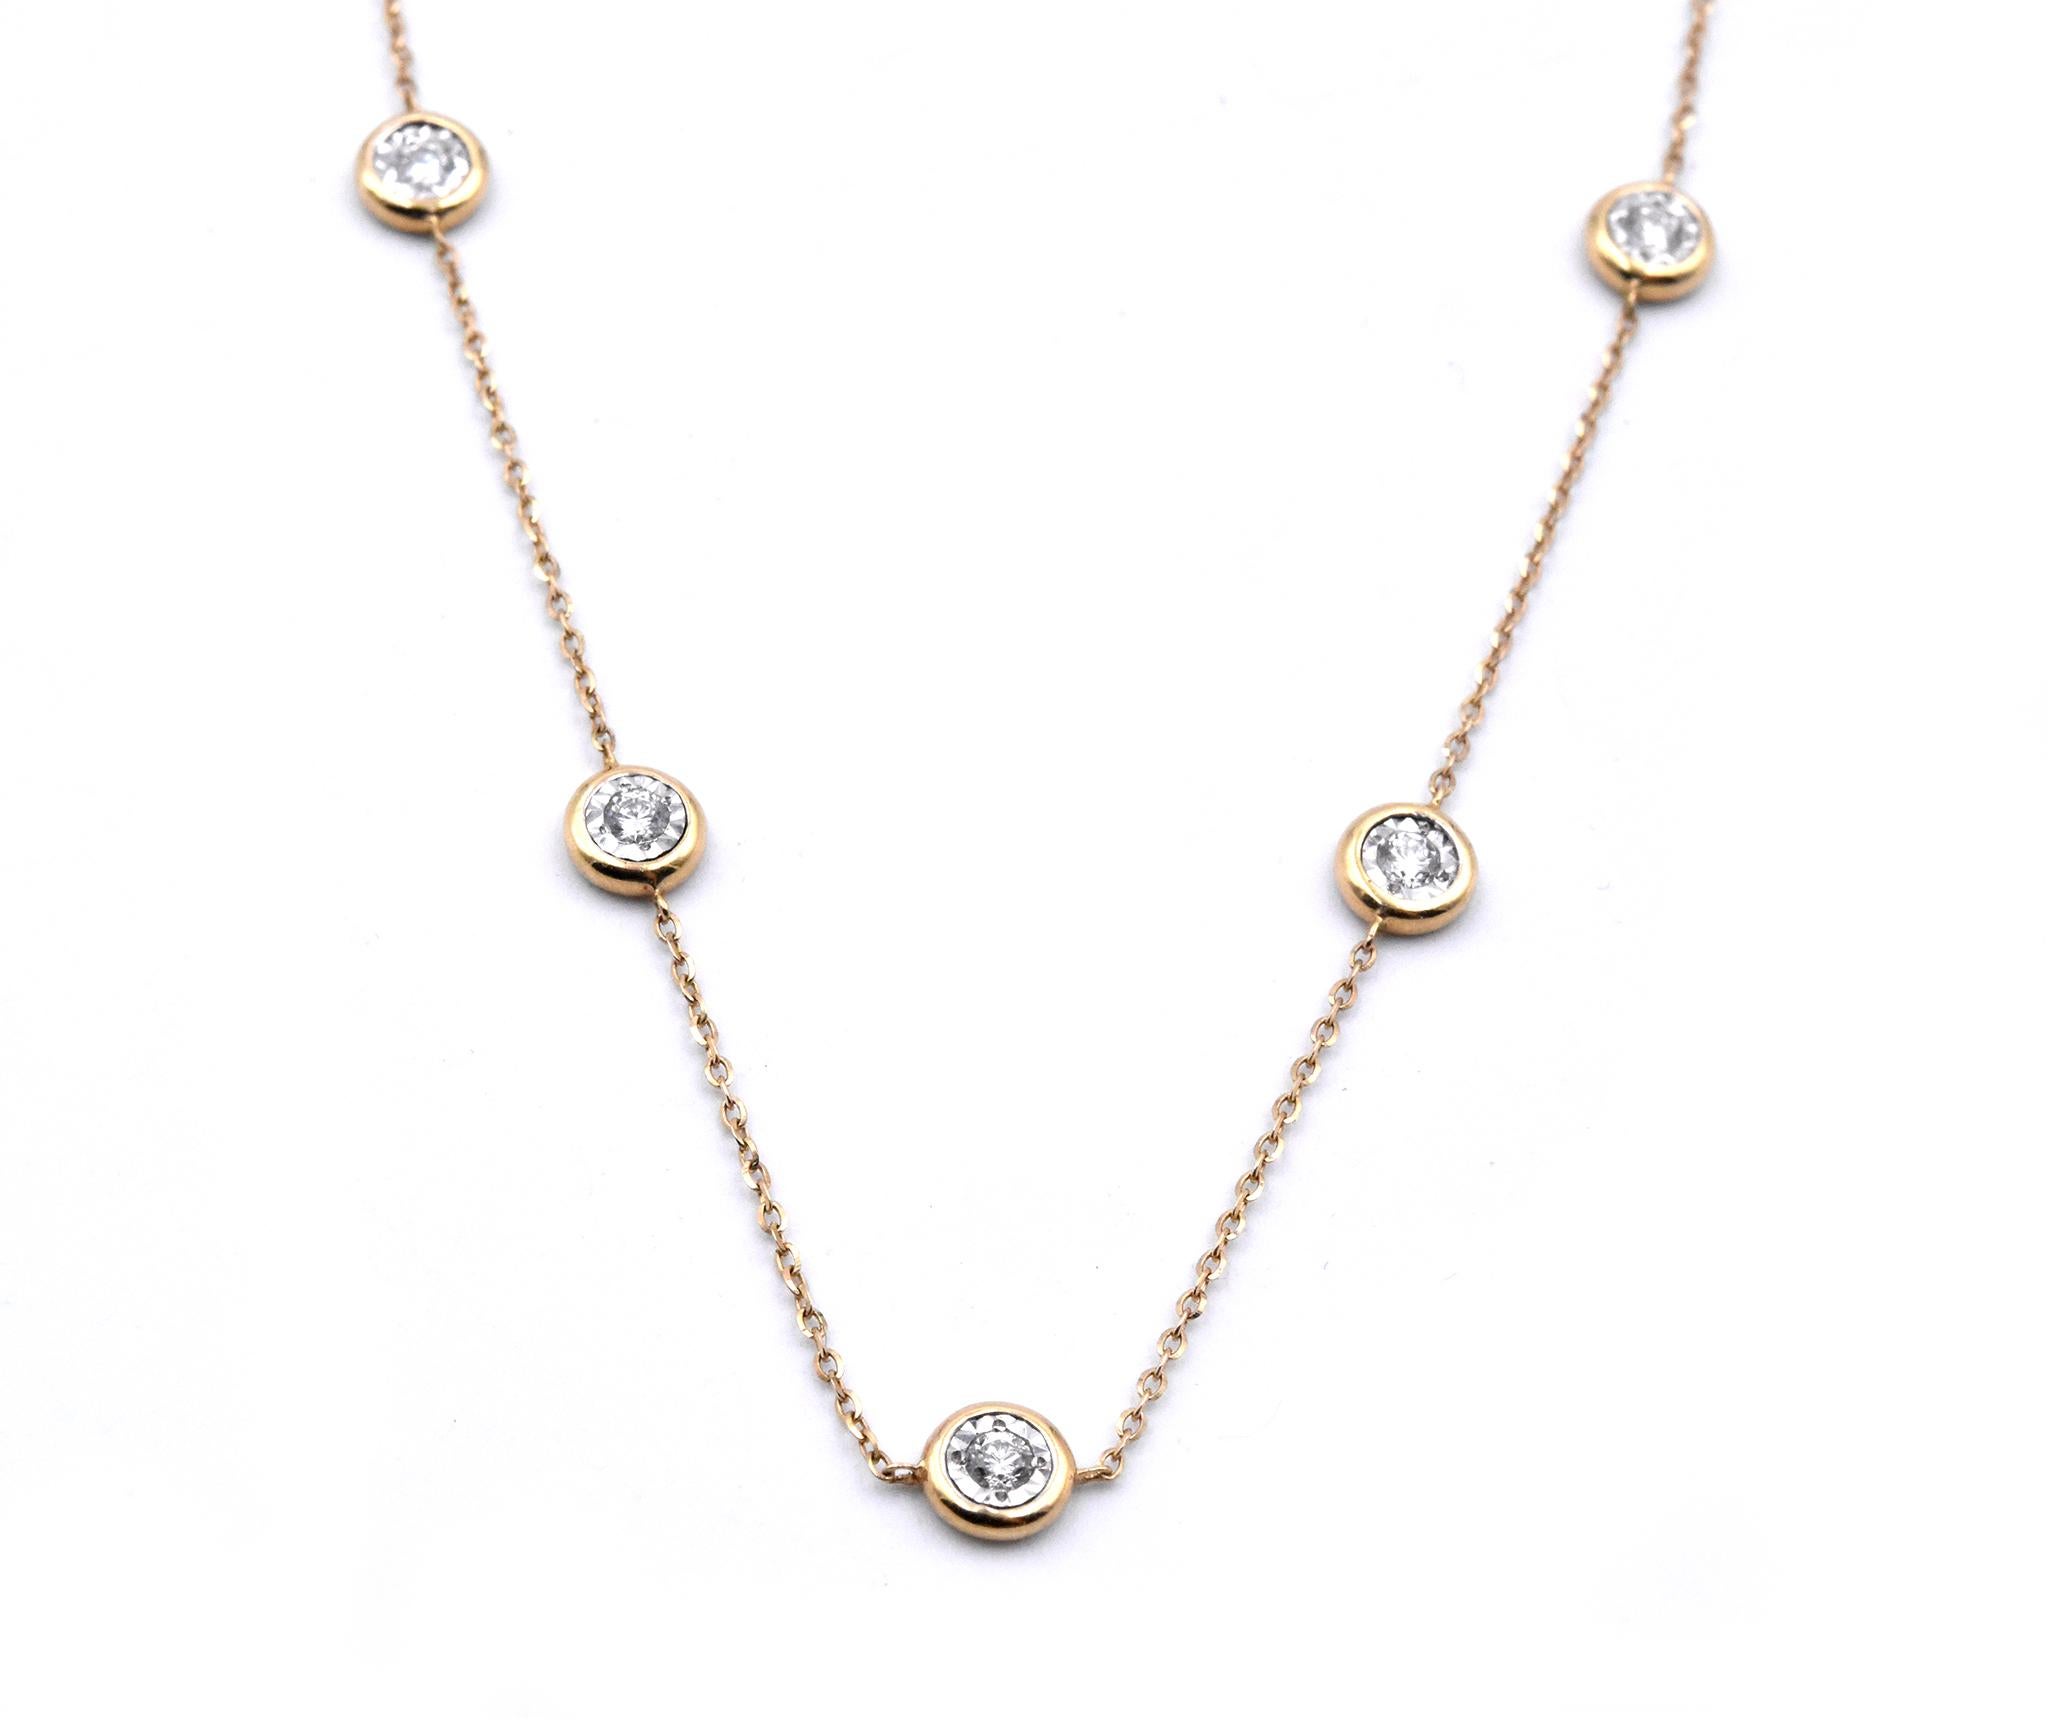 Material: 18k yellow gold
Diamonds: 13 round brilliant cuts = .84cttw
Color: G
Clarity: VS
Dimensions: necklace is 18-inches in length
Weight: 4.76 grams